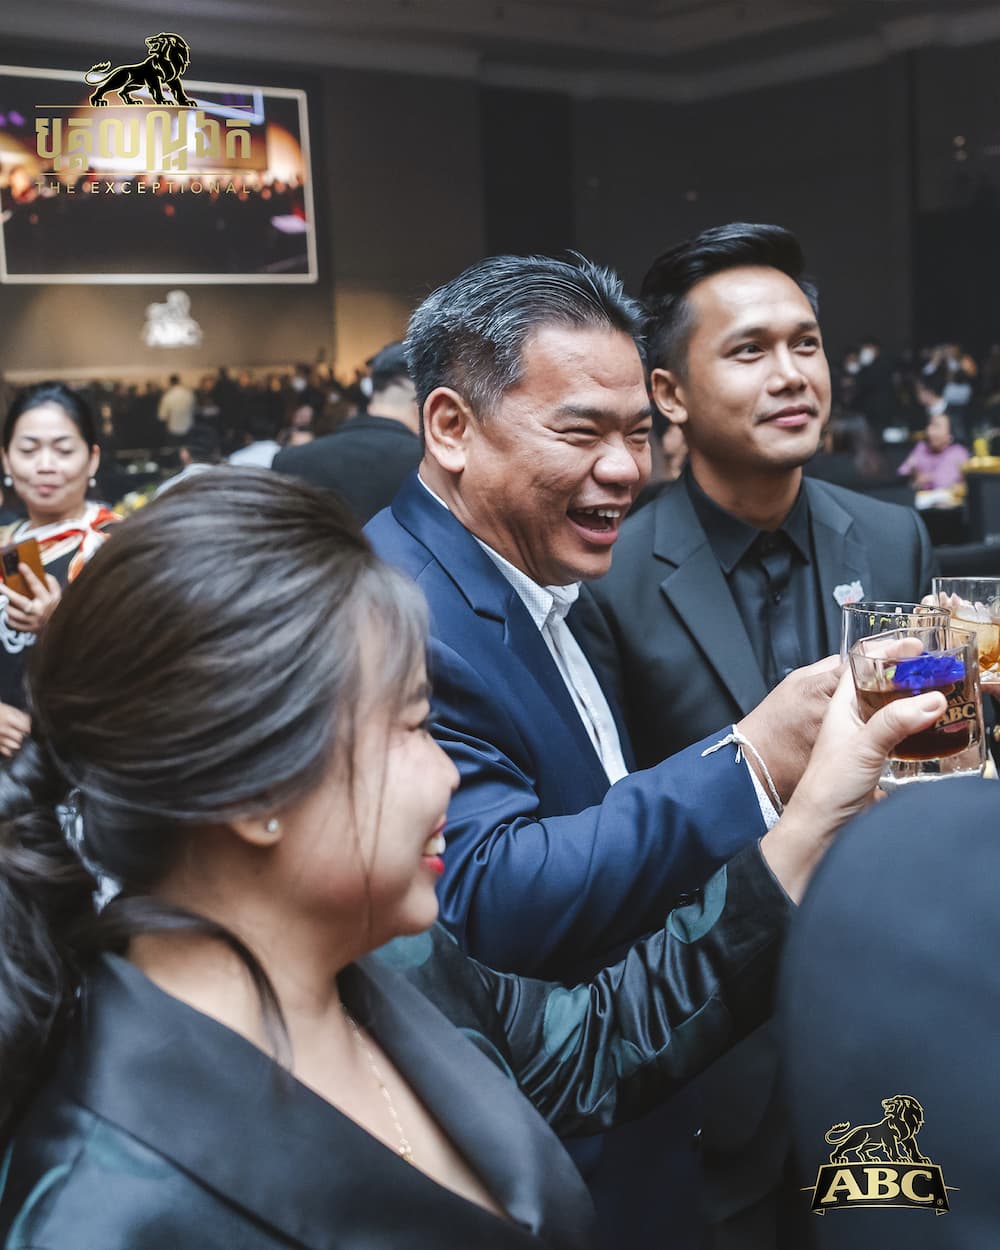 A toast of celebration from the 10 Exceptional Cambodians